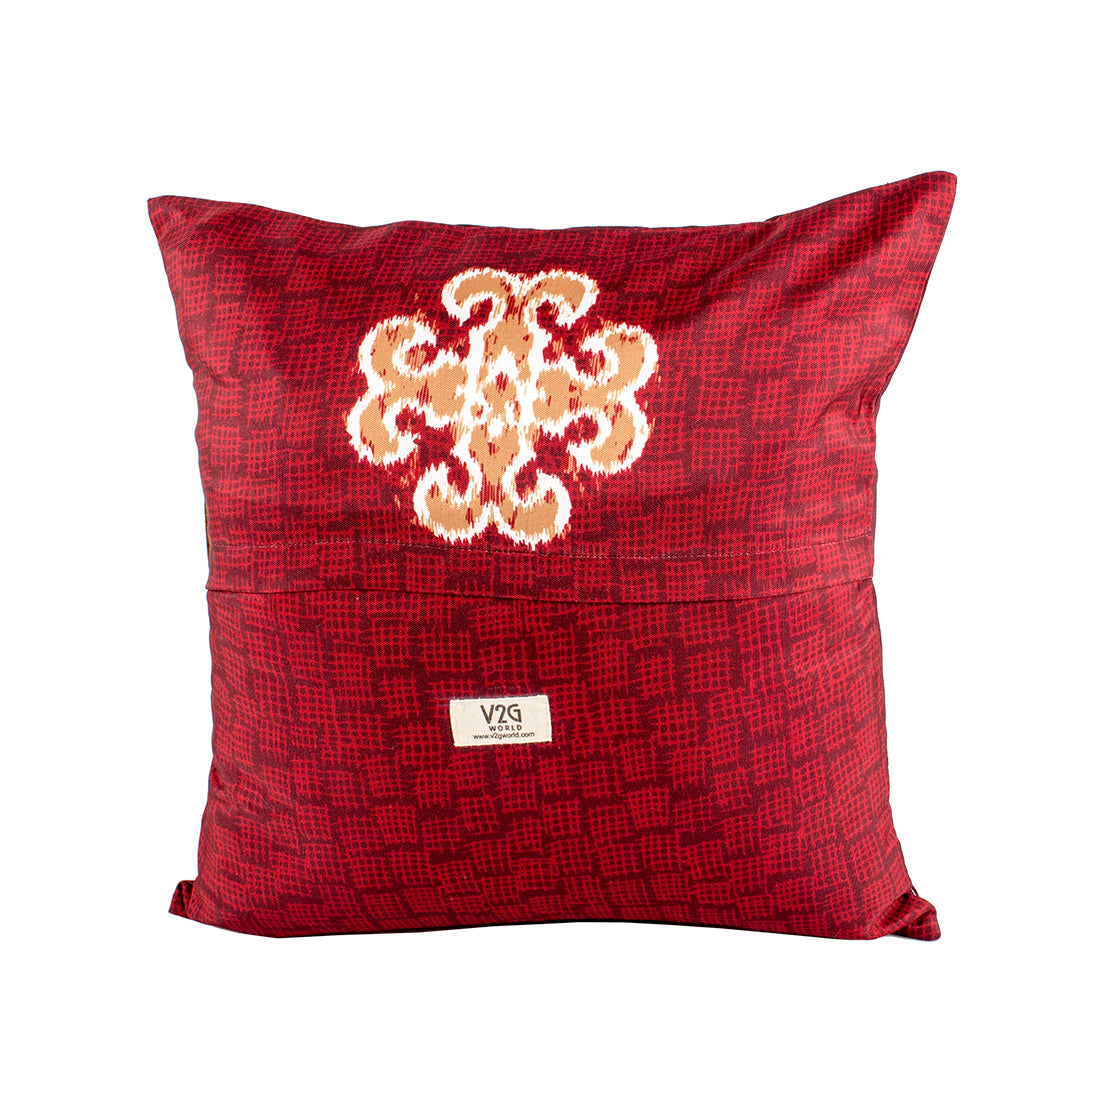 Cushion Cover-Ethnic Collection-59-Set of 2